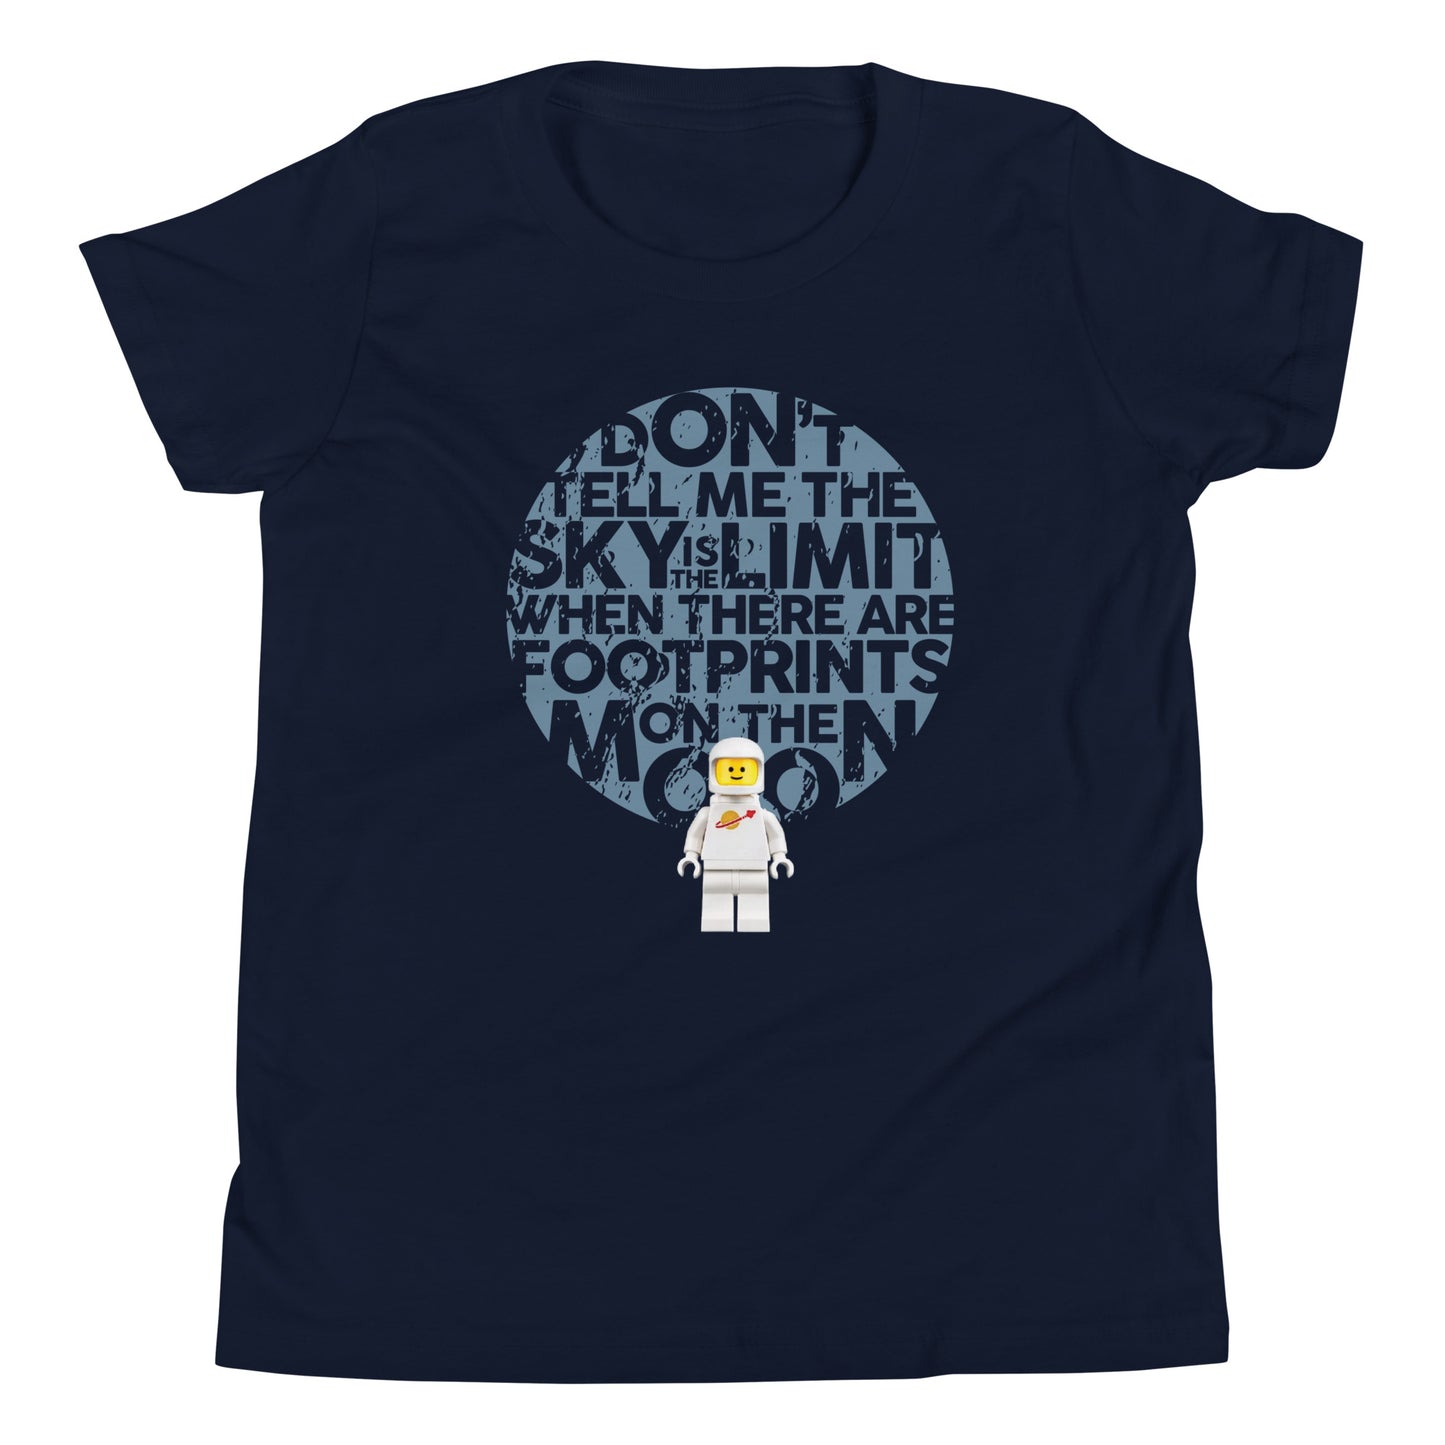 Footsteps on the Moon - Youth Short Sleeve T-Shirt